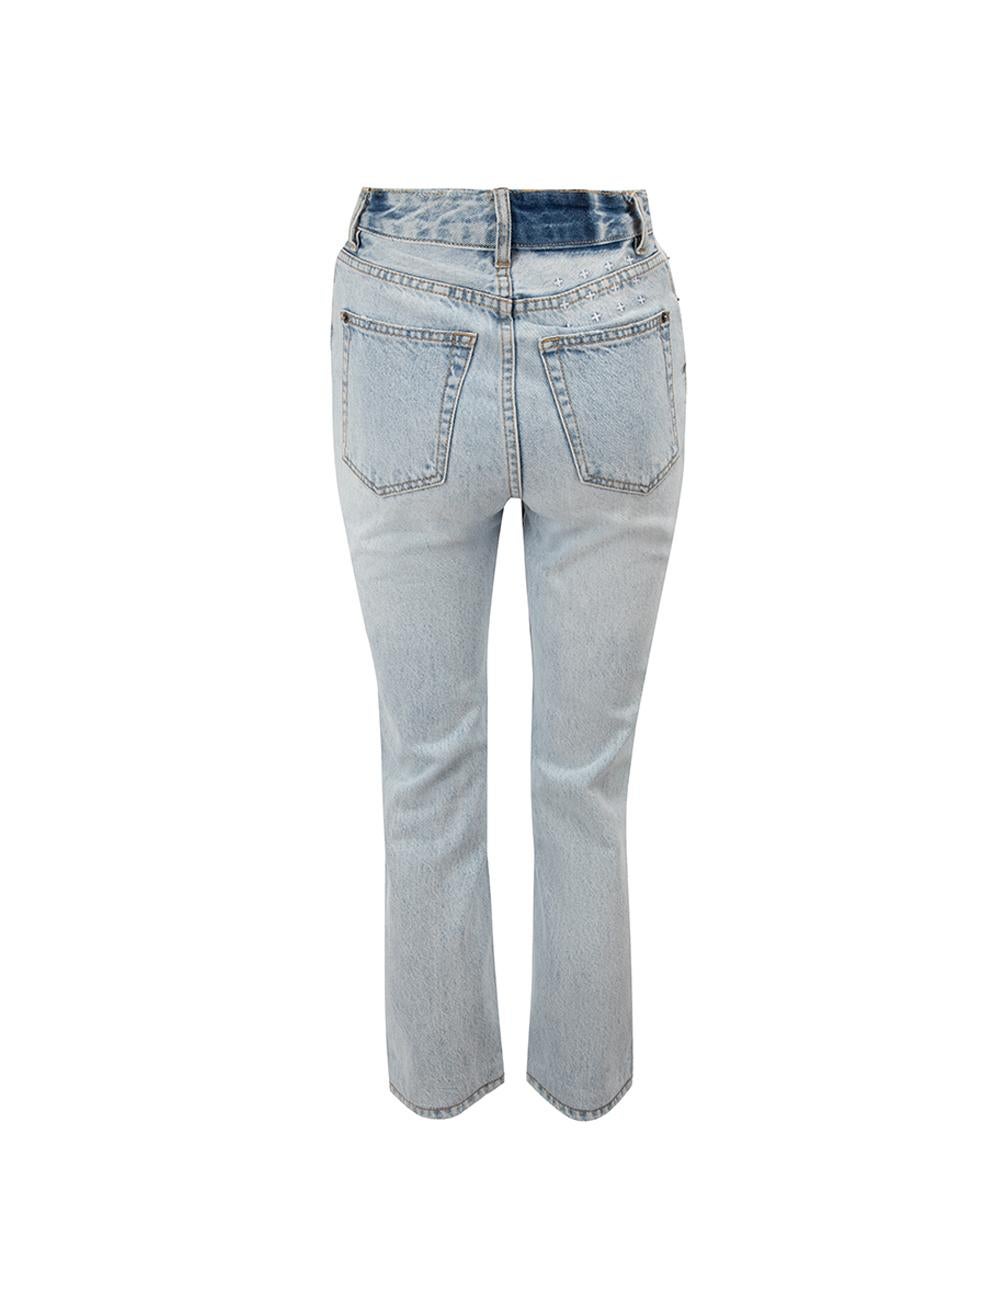 Ksubi Light Blue Denim Wash Straight Jeans Size XXS In Good Condition For Sale In London, GB